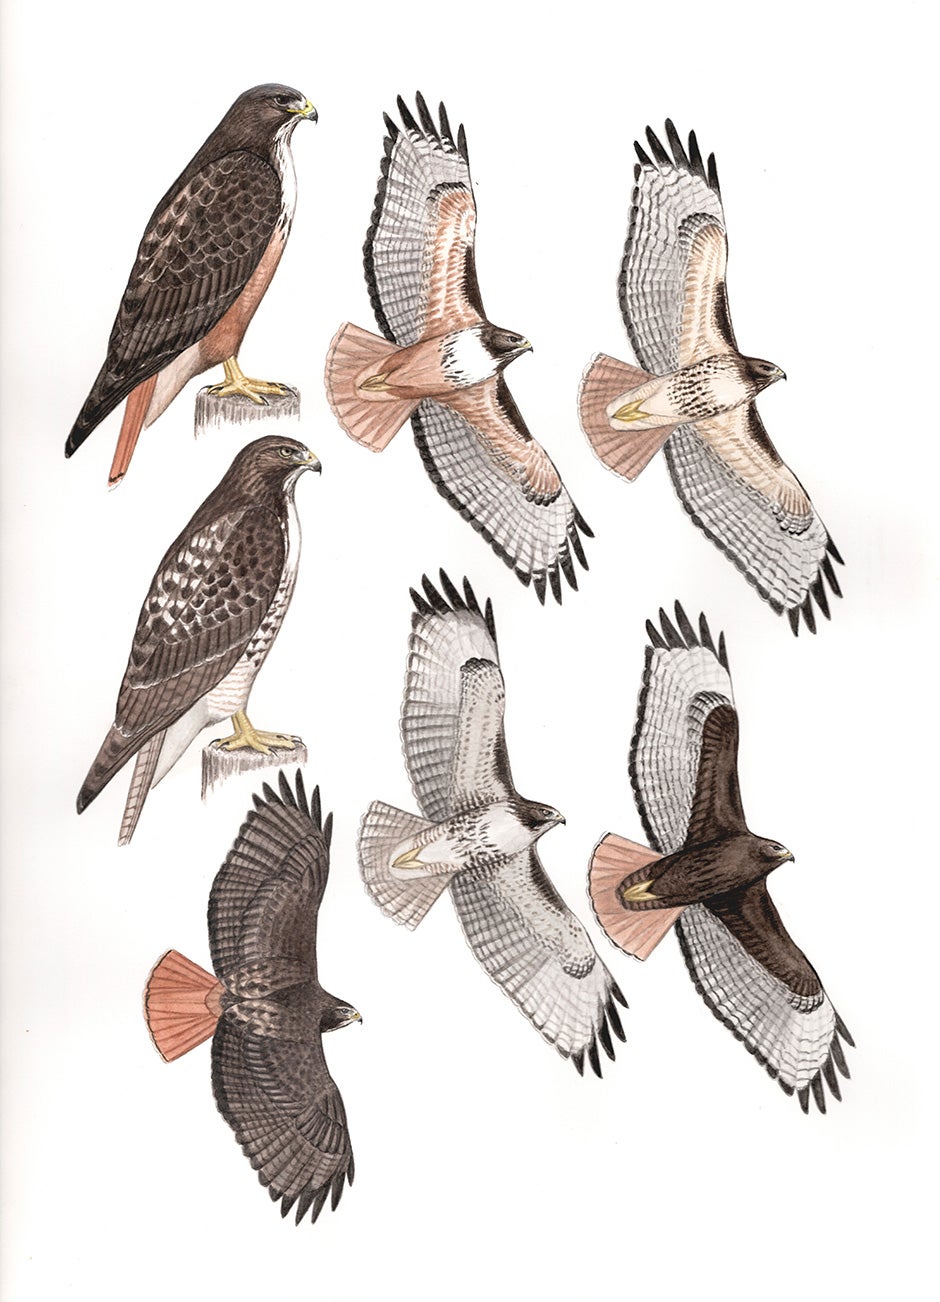 Illustration by Bryce Robinson of Red-Tailed Hawks sitting and flying